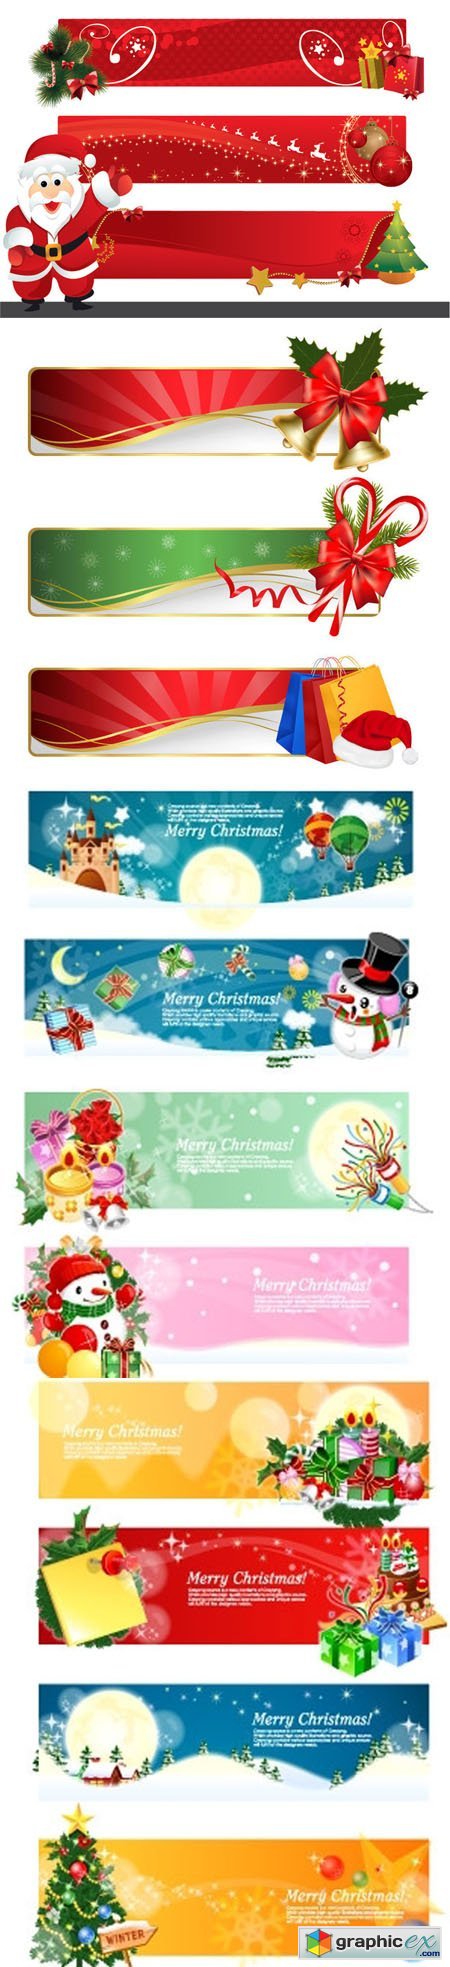 Christmas Promotion Banners in Vector